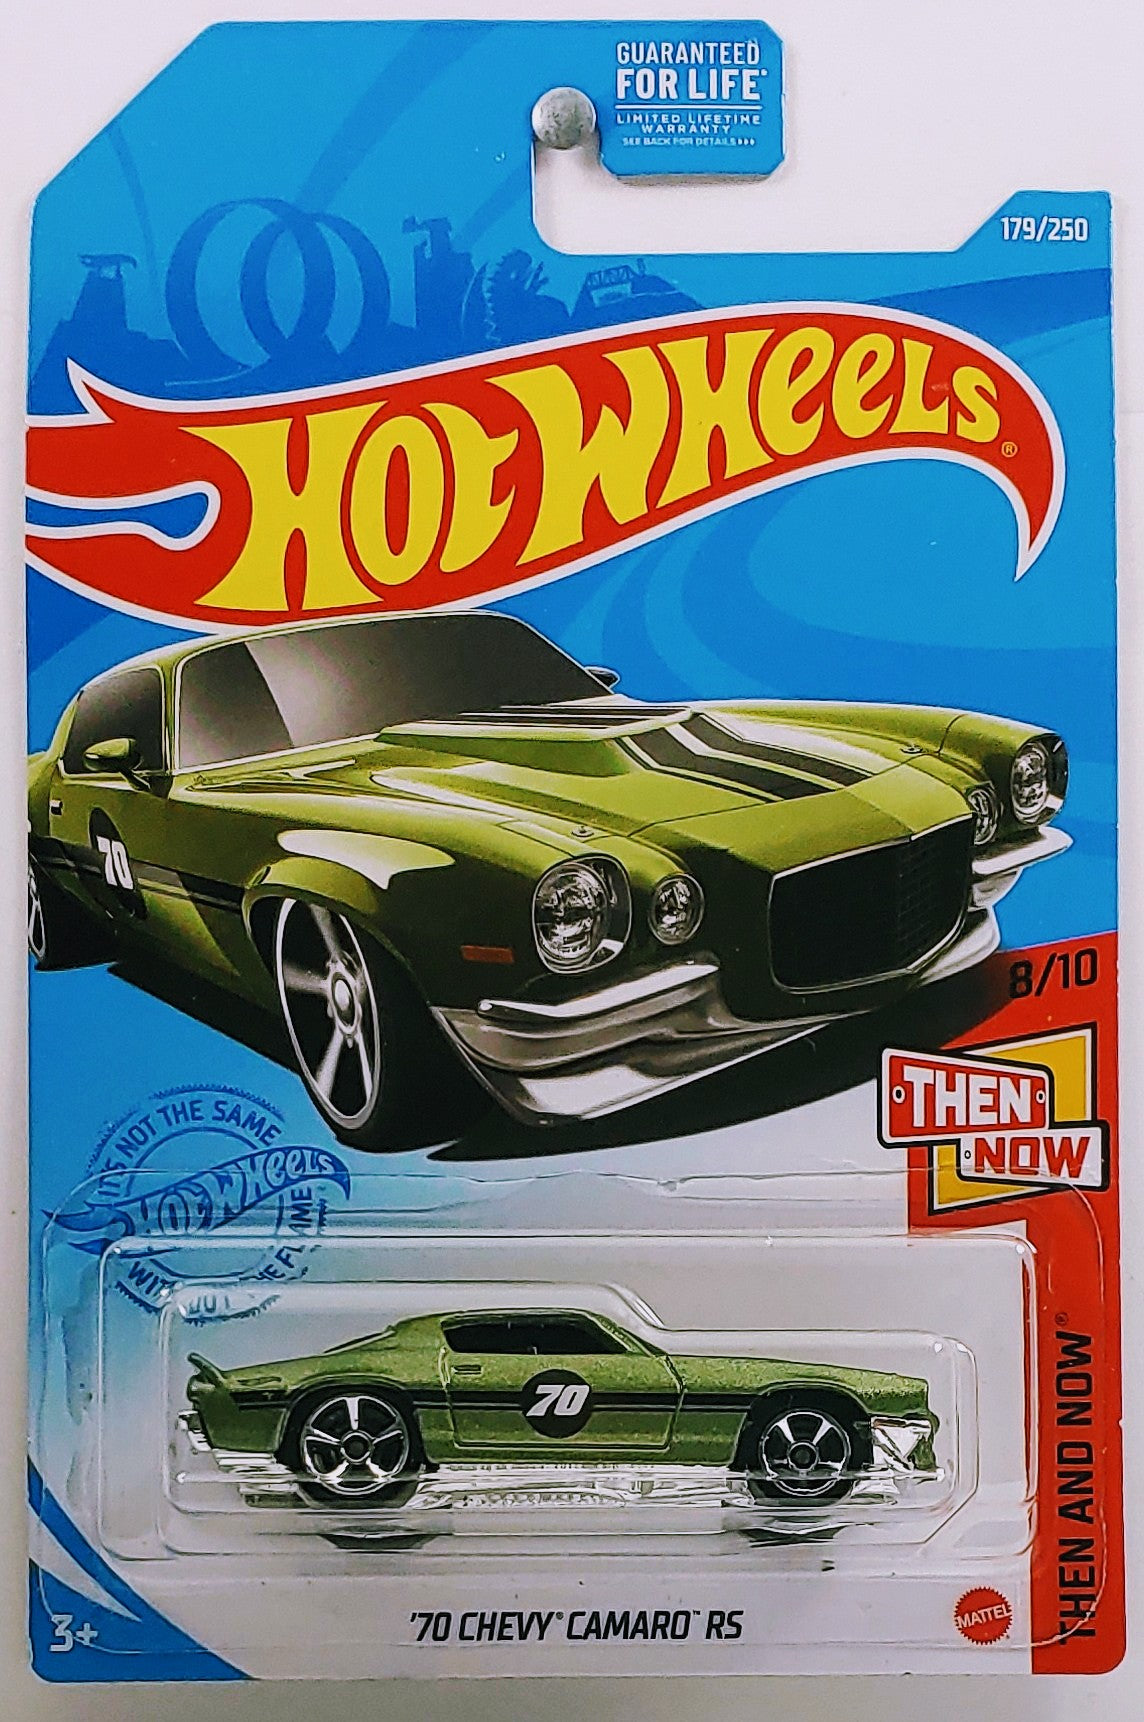 Hot Wheels 2021 - Collector # 179/250 - Then And Now 8/10 - '70 Chevy Camaro RS - Metallic Green - Walgreens Exclusive